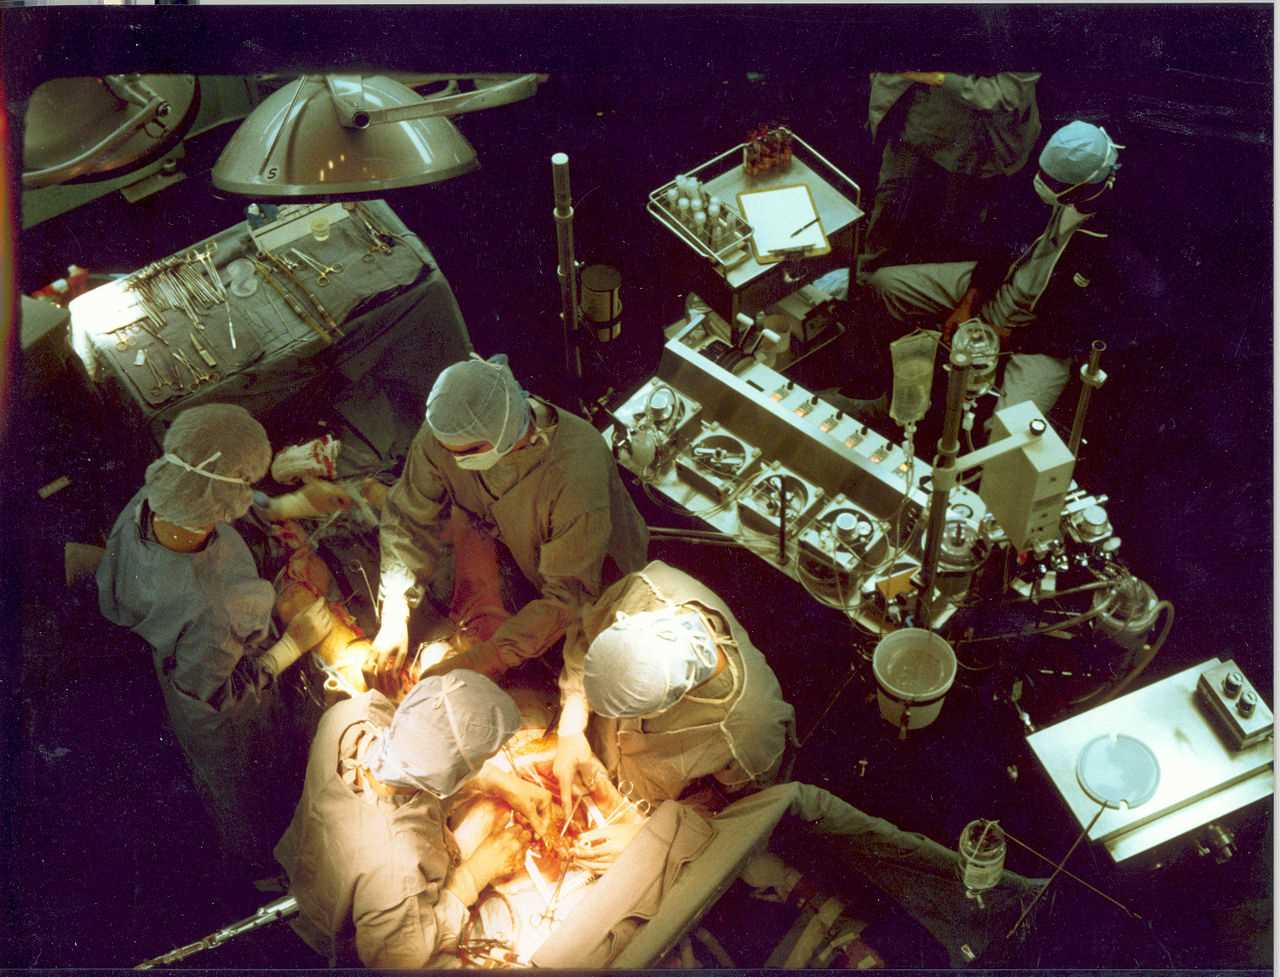 Early in a coronary artery bypass operation, during vein harvesting from the legs (left of image) and the establishment of cardiopulmonary bypass by placement of an aortic cannula (bottom of image). The perfusionist and heart-lung machine are on the upper right. The patient's head (not seen) is at the bottom.